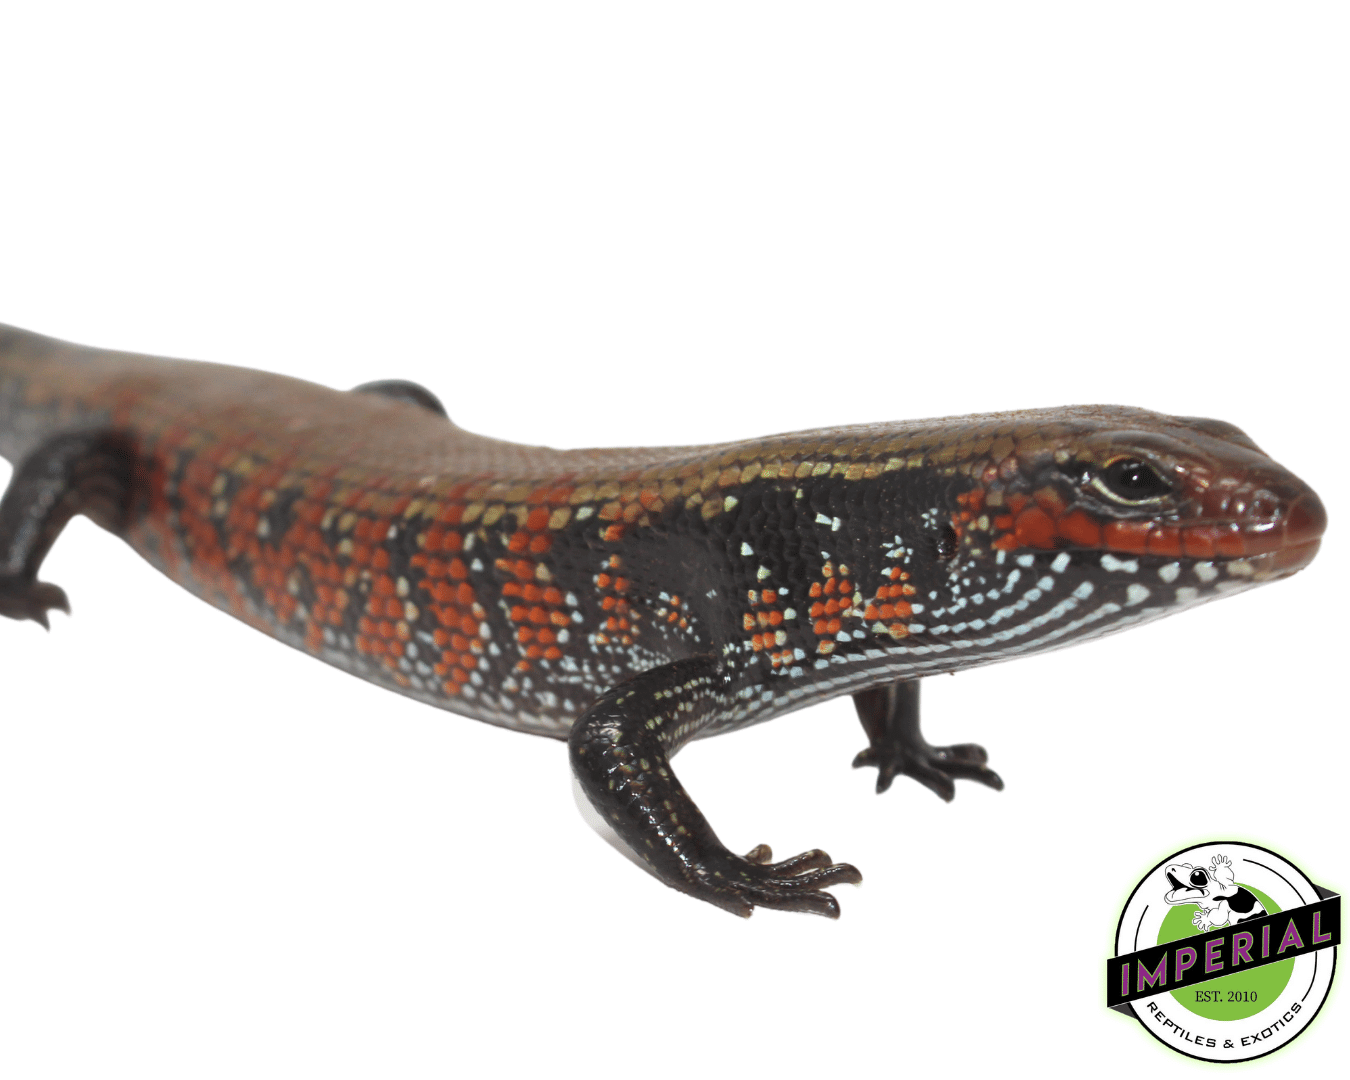 fire skink for sale, buy reptiles online